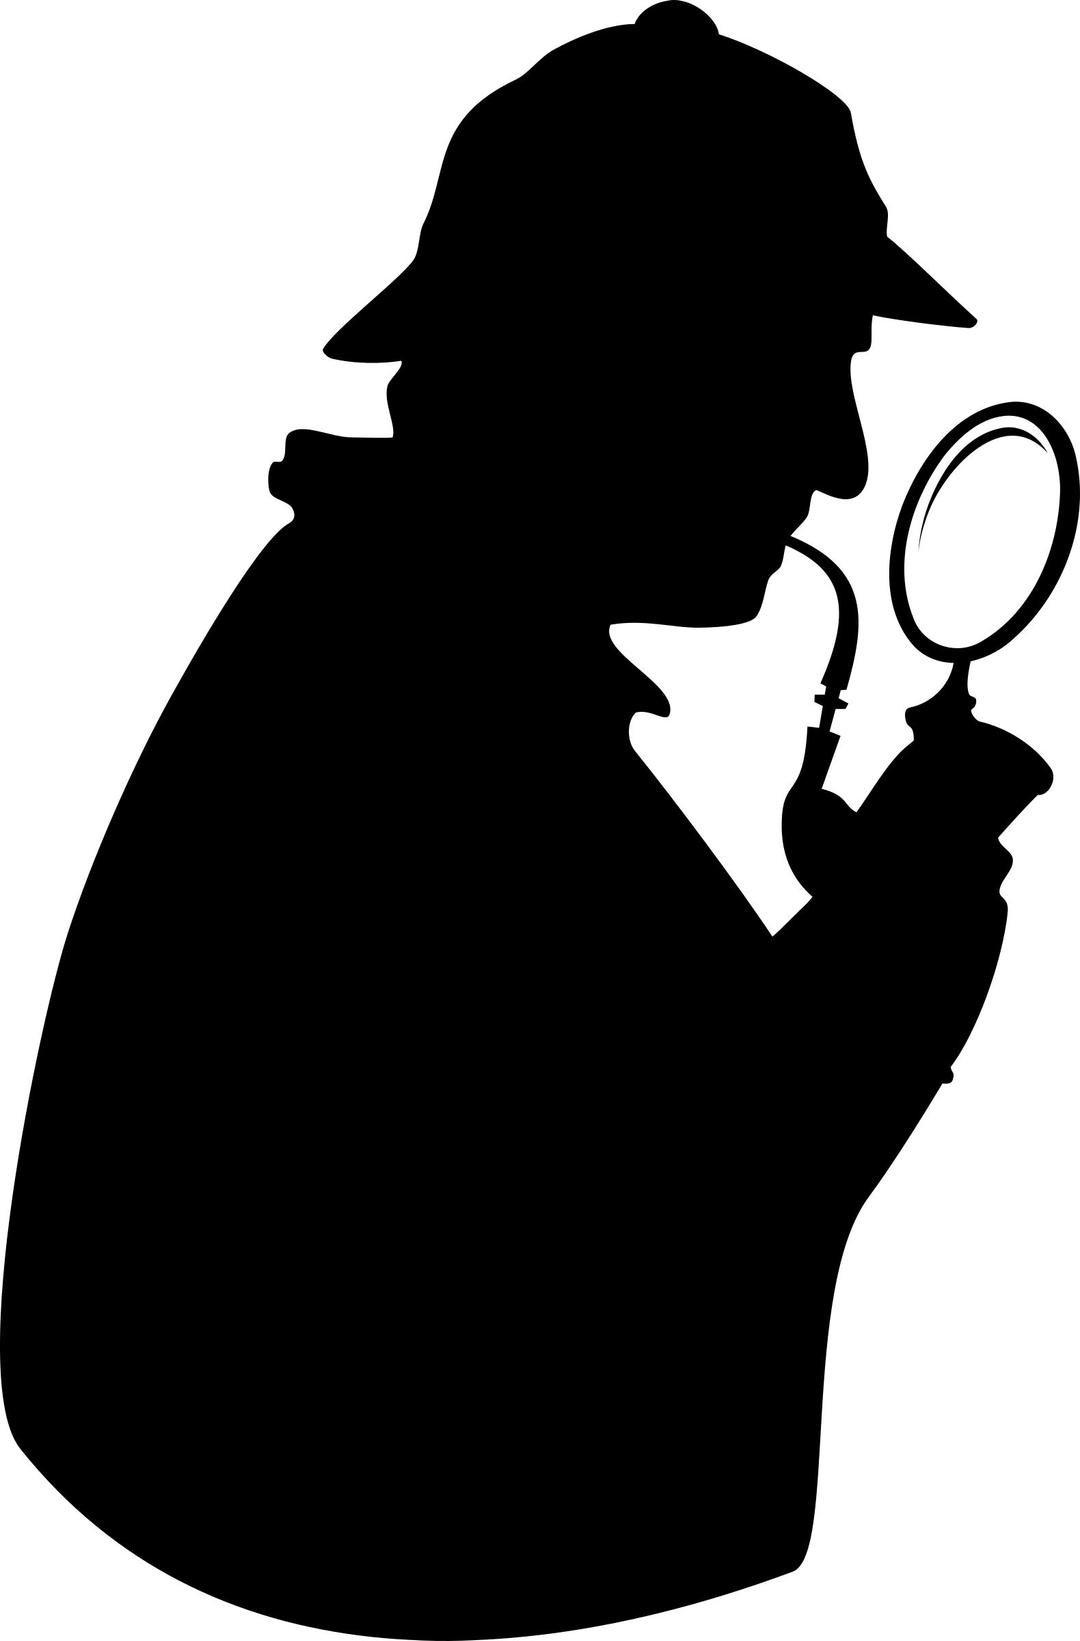 Consulting detective with pipe and magnifying glass [silhouette] png transparent